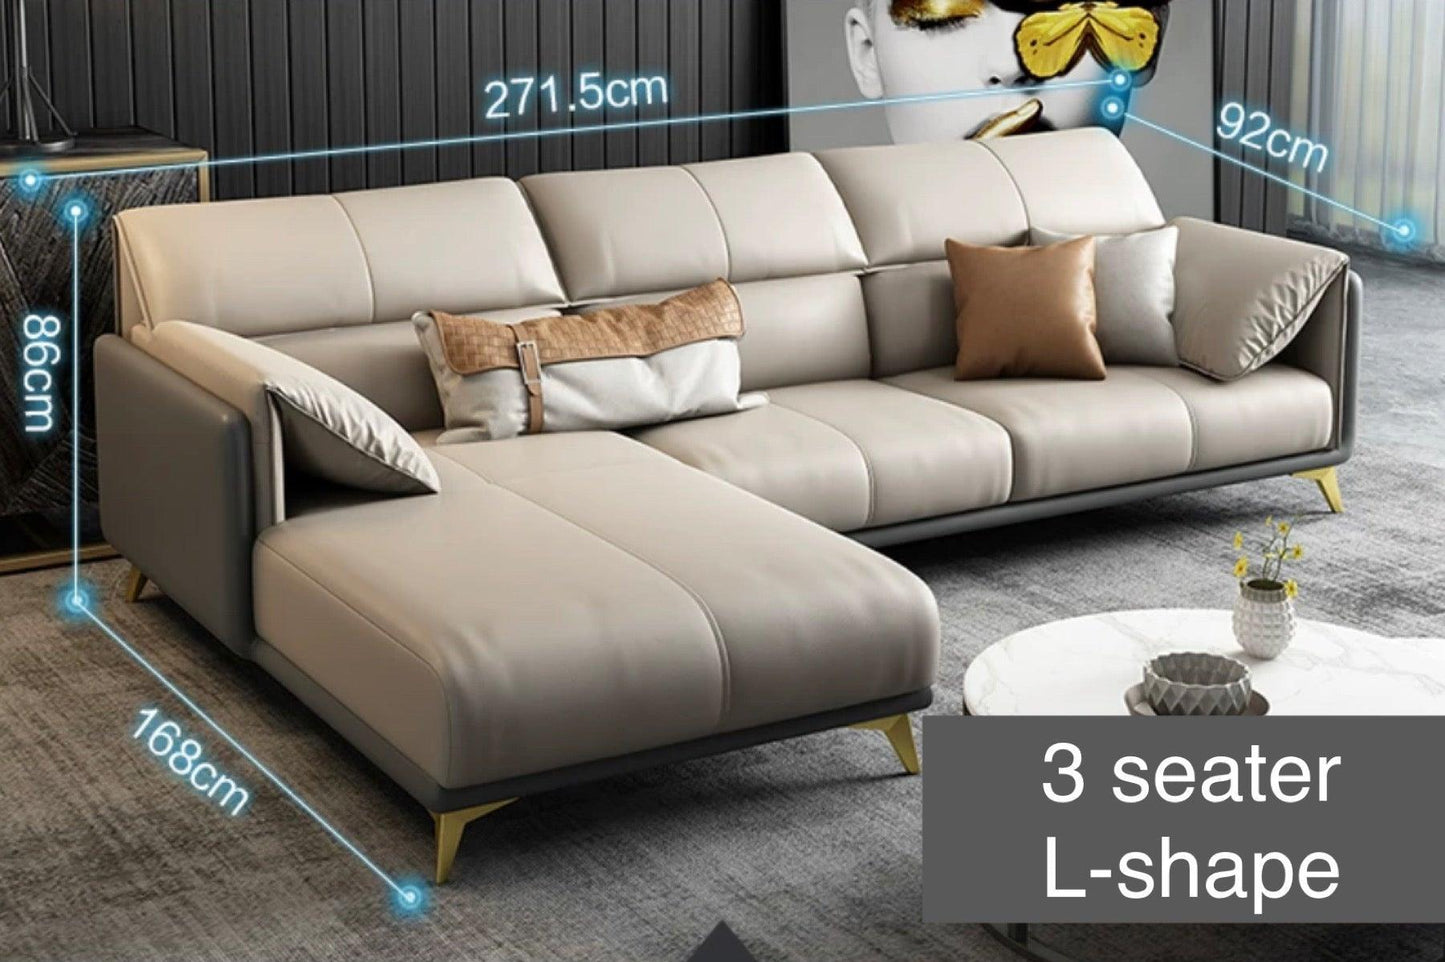 home-atelier-f31a Italian Genuine Cowhide Leather / 3 seater L-shape/ Length 271.5cm / Camel Caston Sectional Leather Sofa